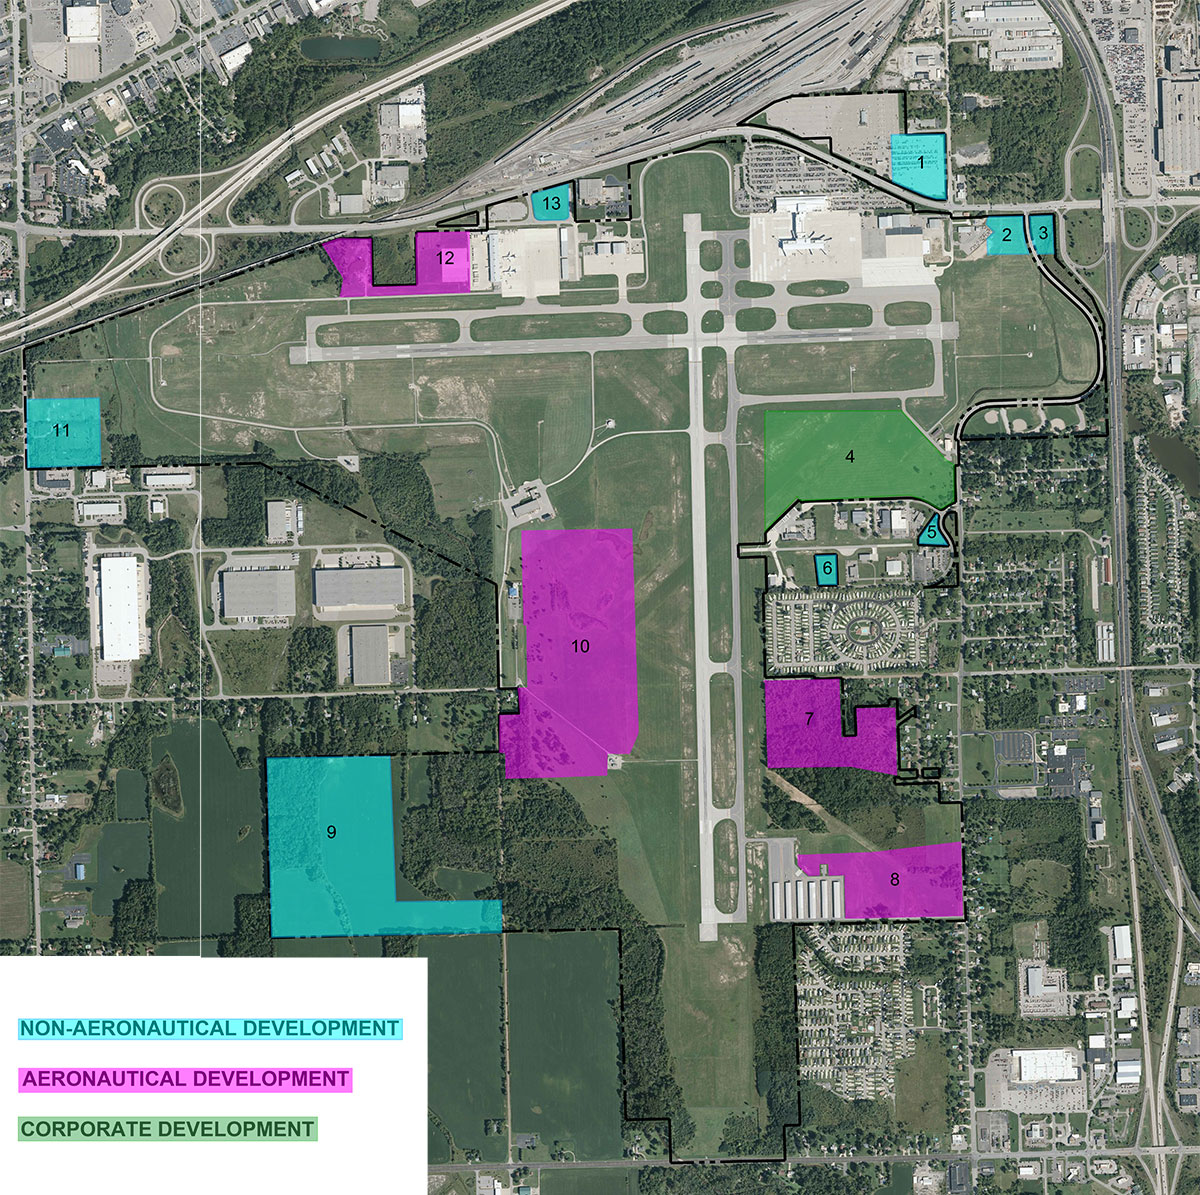 10 acres (approx), zoned Airport District (AD) within Flint Township. 5.5 acres (approx), zoned Industrial (E) within City of Flint. 3 acres (approx), zoned Industrial (E) within City of Flint. 46 acres (approx), zoned Industrial (E) within City of Flint, parcel may be split. 1.5 acres (approx), zoned Industrial (E) within City of Flint. 2.5 acres (approx), zoned Industrial (E) within City of Flint. 27 acres (approx), partially zoned Residential Suburban Agricultural (RSA) within Mundy Township and Industrial (E) within City of Flint, parcel may be split. 24.5 acres (approx), zoned Industrial (E) within City of Flint, parcel may be split. 71 acres (approx), zoned Residential Suburban Agricultural (RSA) within Mundy Township, parcel may be split. 77 acres (approx), primarily zoned Industrial (E) within City of Flint, partially zoned Residential Suburban Agricultural (RSA) within Mundy Township, parcel may be split. 7 acres (approx), zoned Industrial (E) within City of Flint.  11 acres (approx), zoned Industrial (E) within City of Flint.  3 acres (approx) , zoned Airport District (AD) within Flint Township.